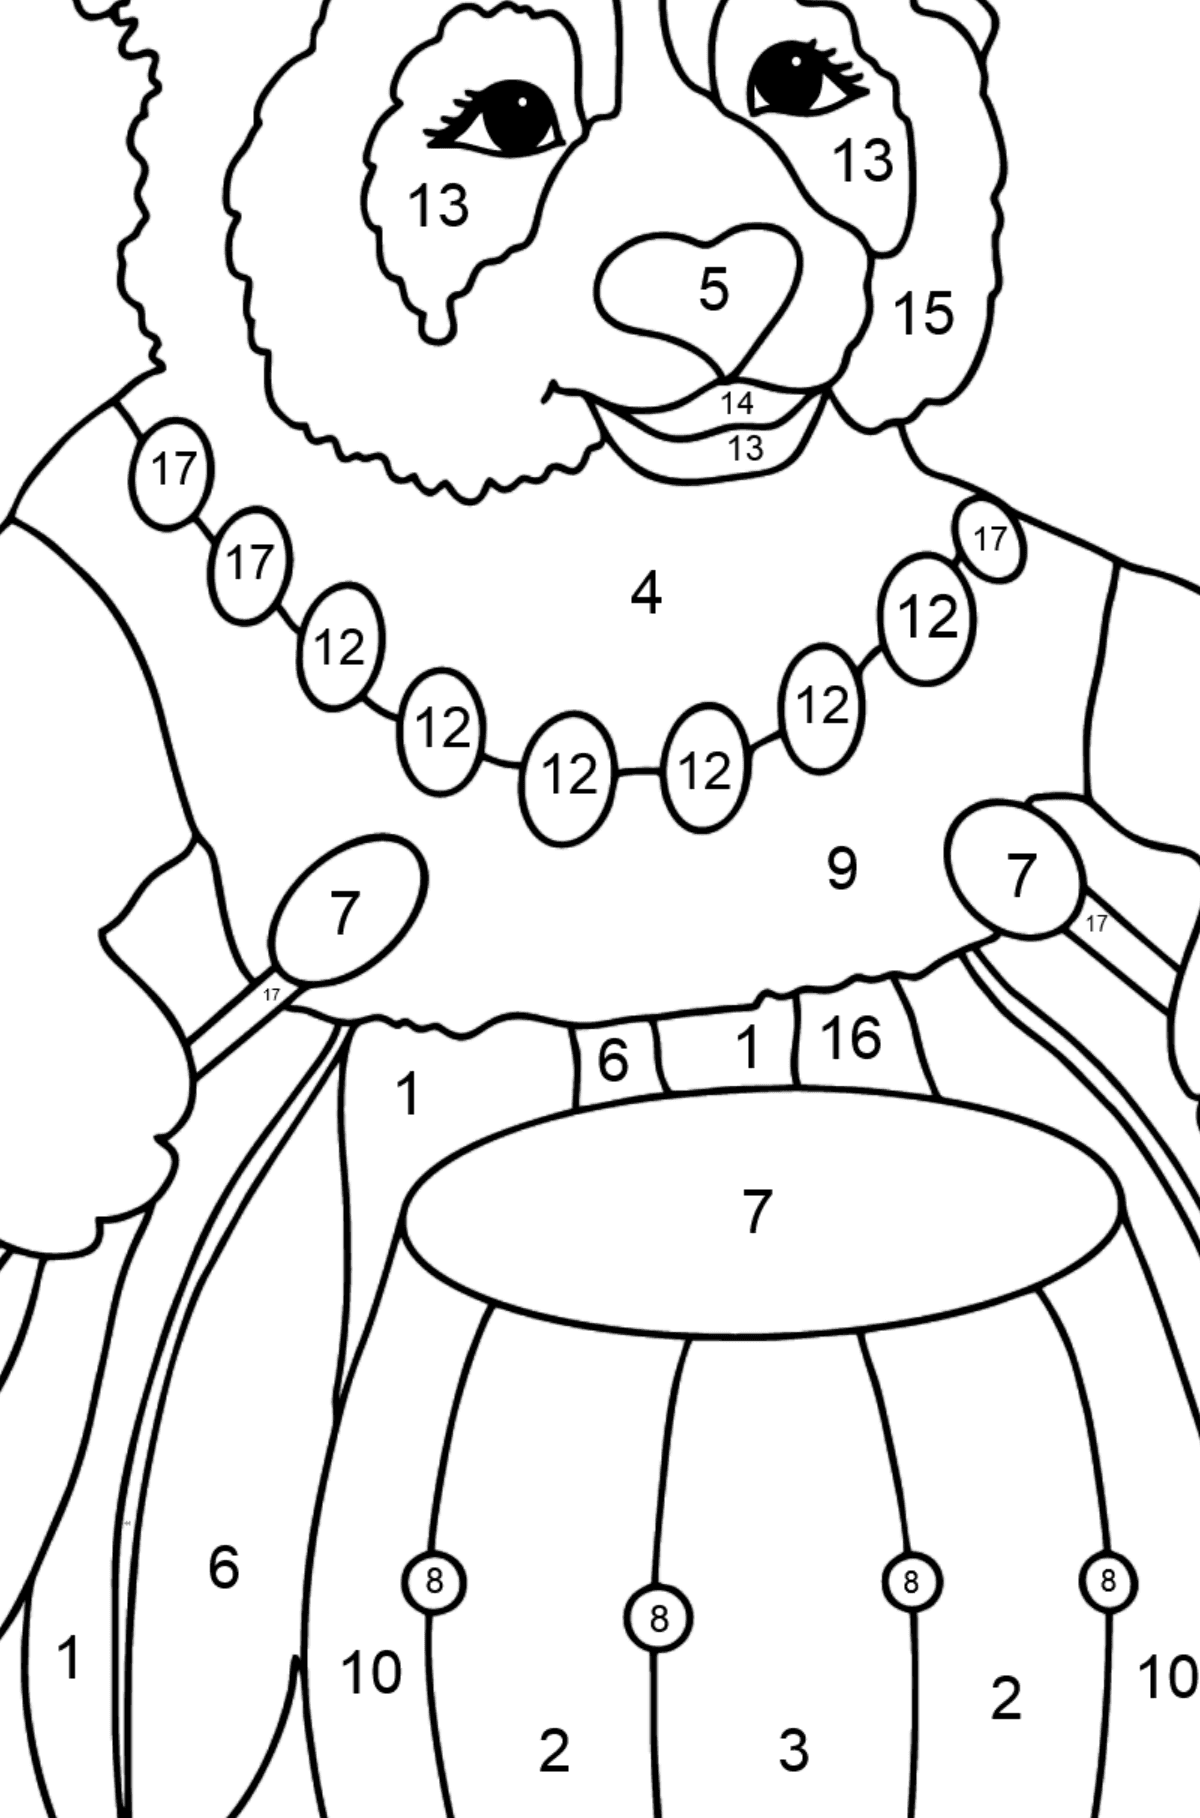 Panda For Kids (Hard) coloring page - Coloring by Numbers for Kids